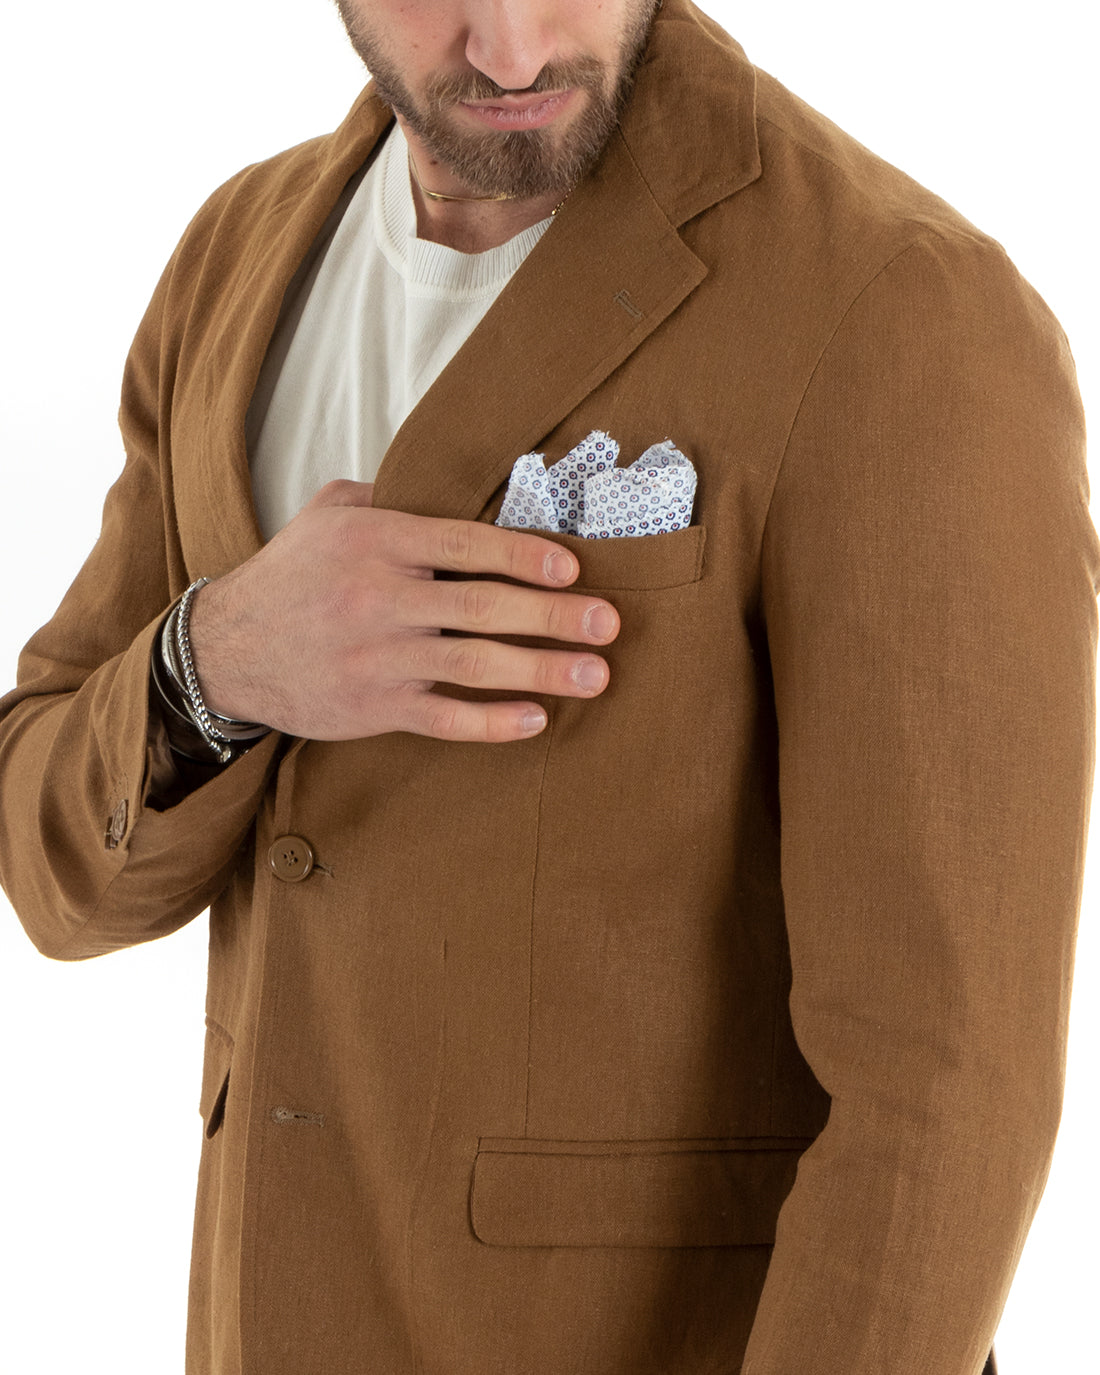 Single-breasted men's suit, tailored linen suit, jacket and trousers in solid color Camel GIOSAL-OU2327A